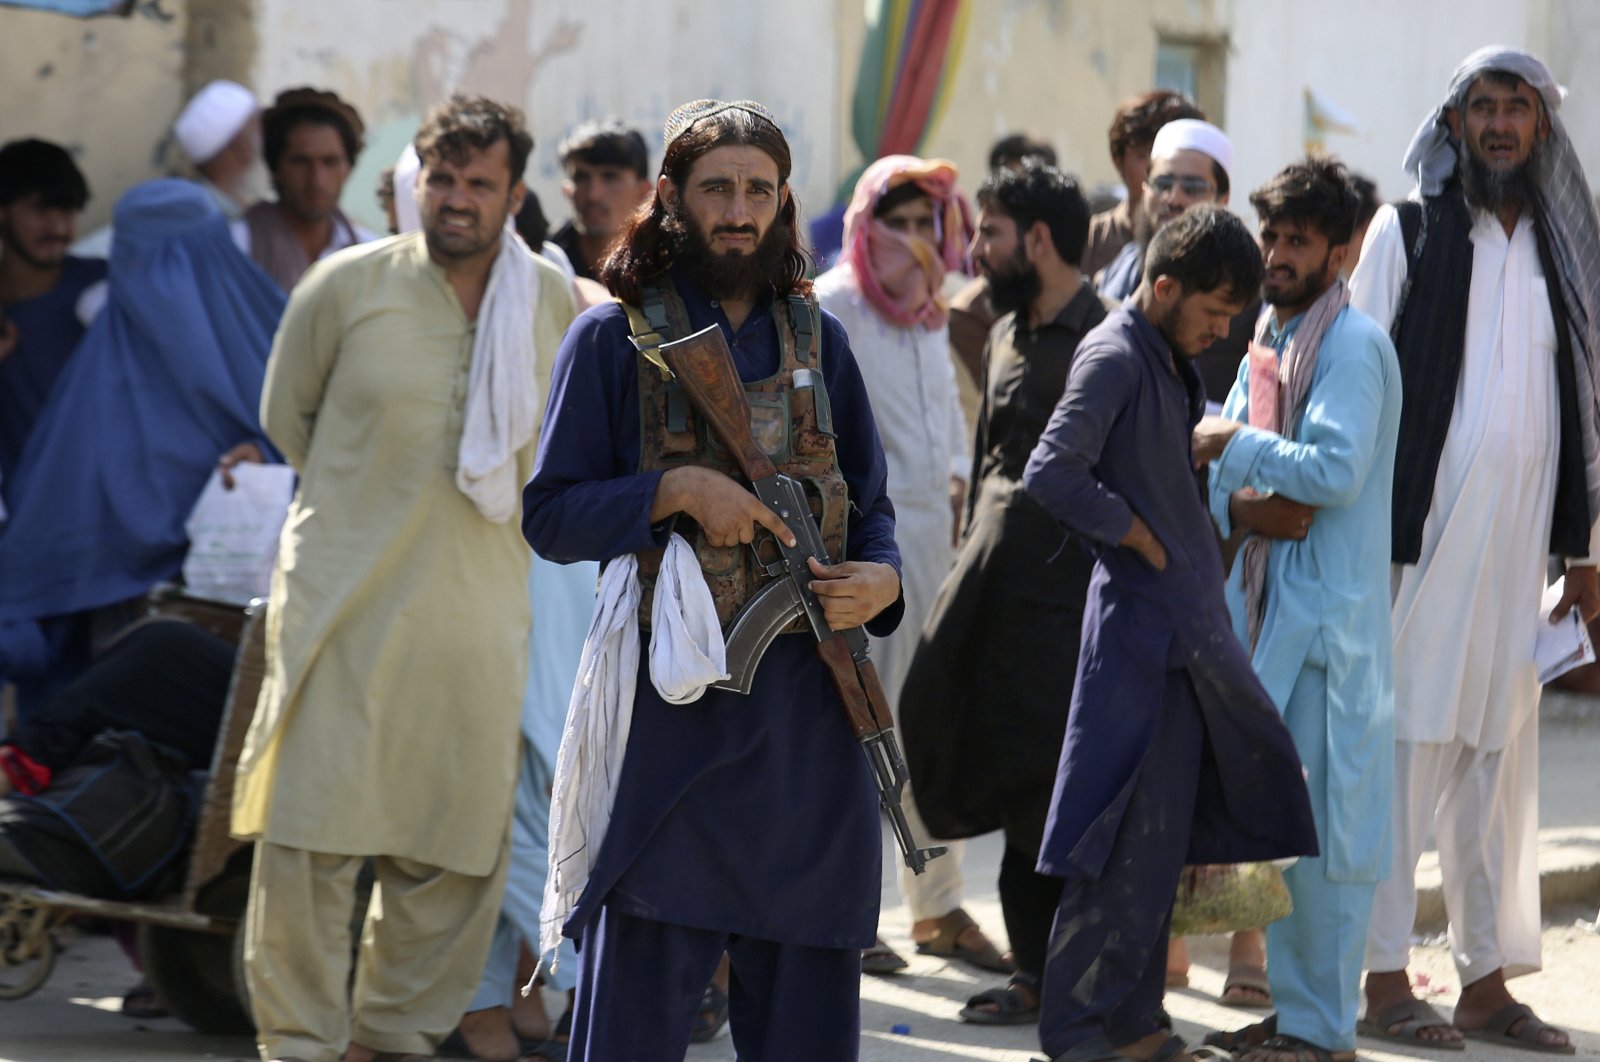 A Taliban fighter stands guard on Afghan side while people wait to cross at a border crossing point between Pakistan and Afghanistan, in Torkham, in Khyber district, Pakistan, Aug. 21, 2021. (AP Photo)